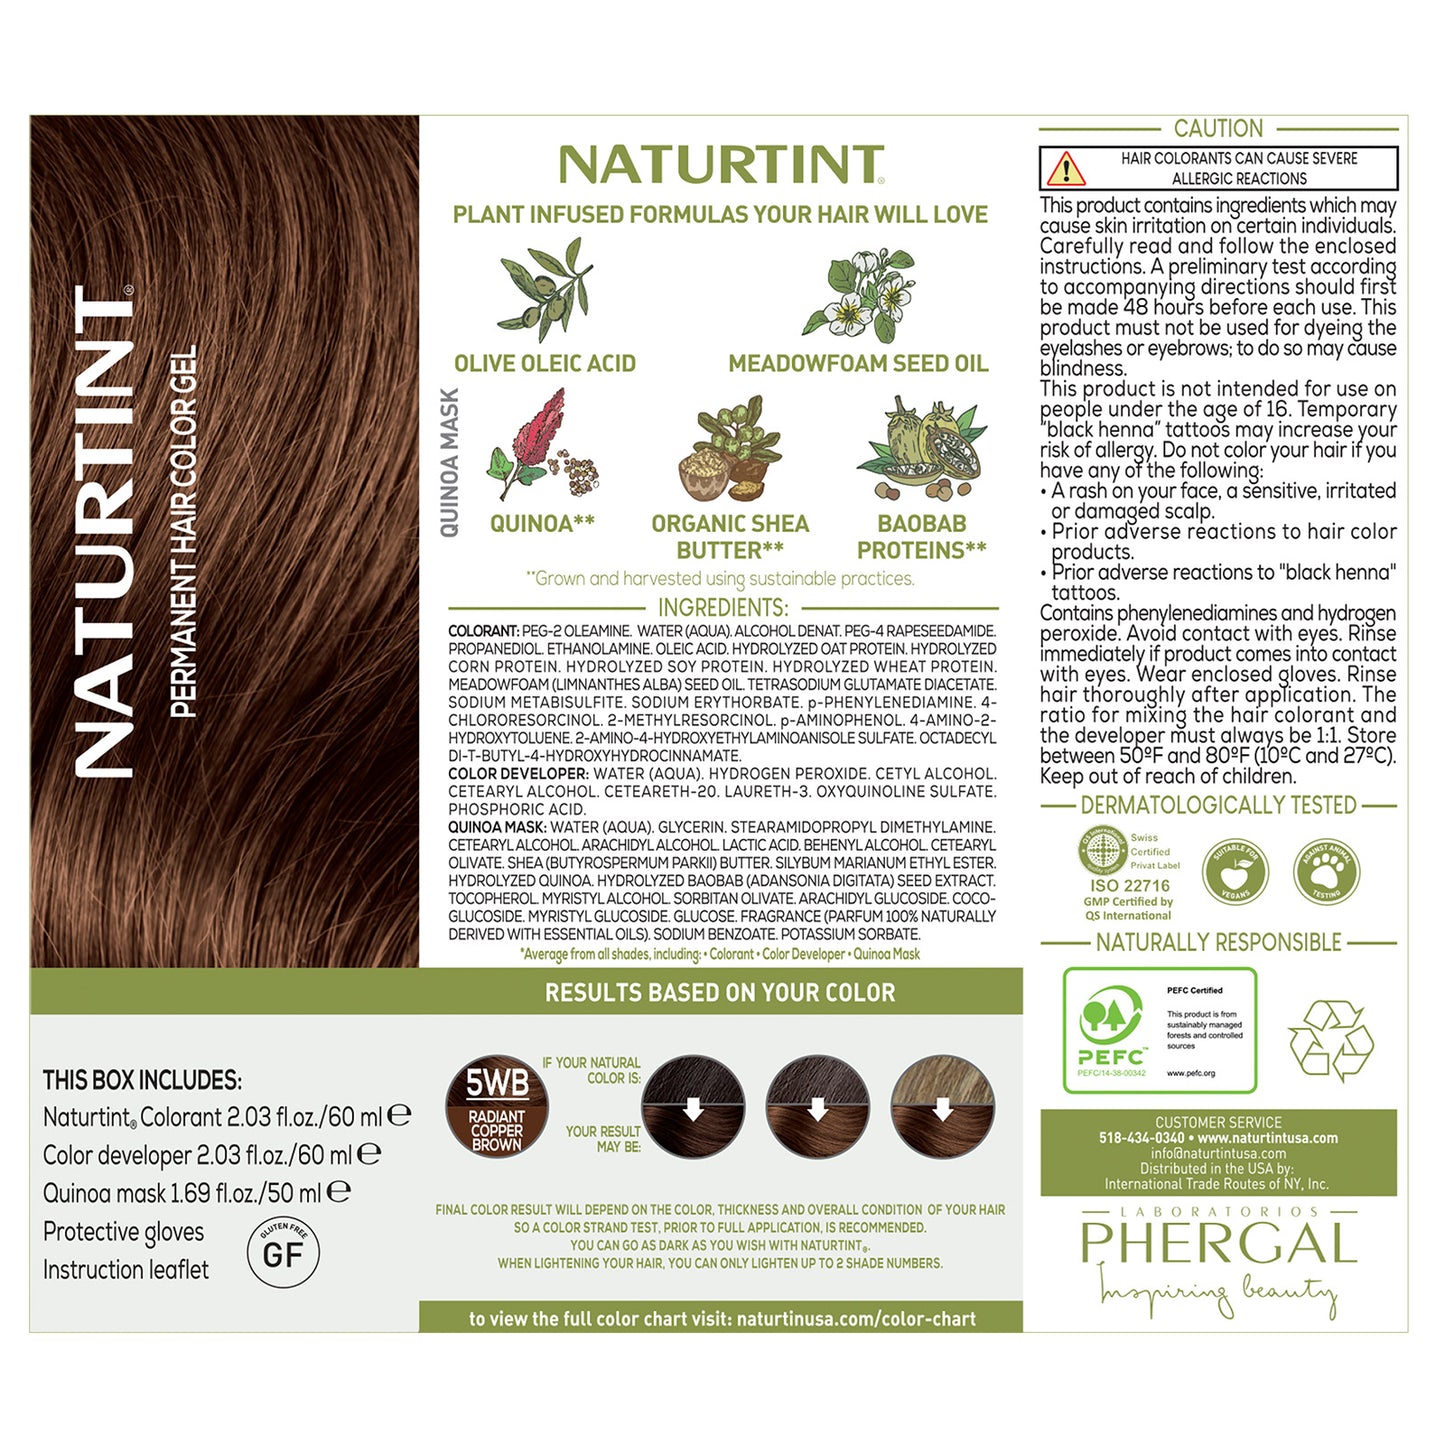 Naturtint Permanent Hair Color 5WB Radiant Copper Brown